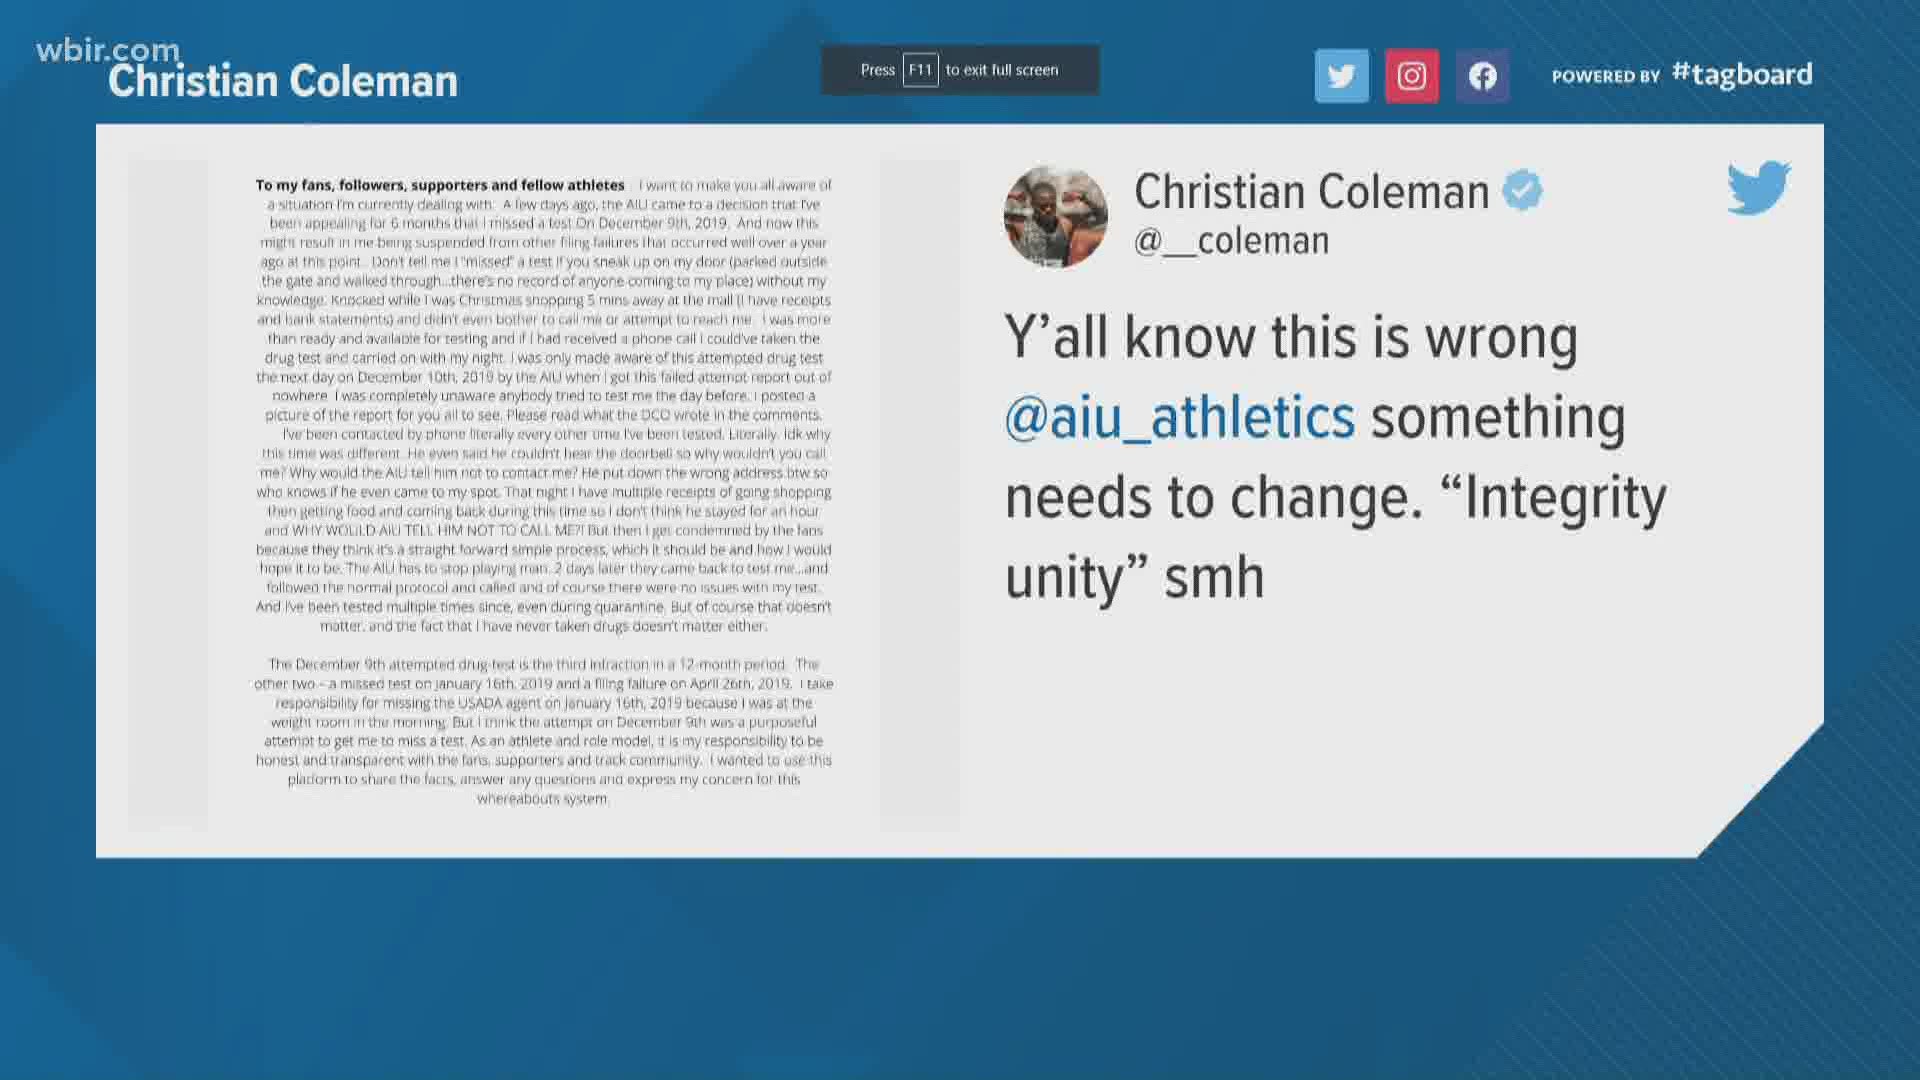 Former UT athlete Christian Coleman is responding to his potential two-year suspension over missed drug tests. He's now appealing.